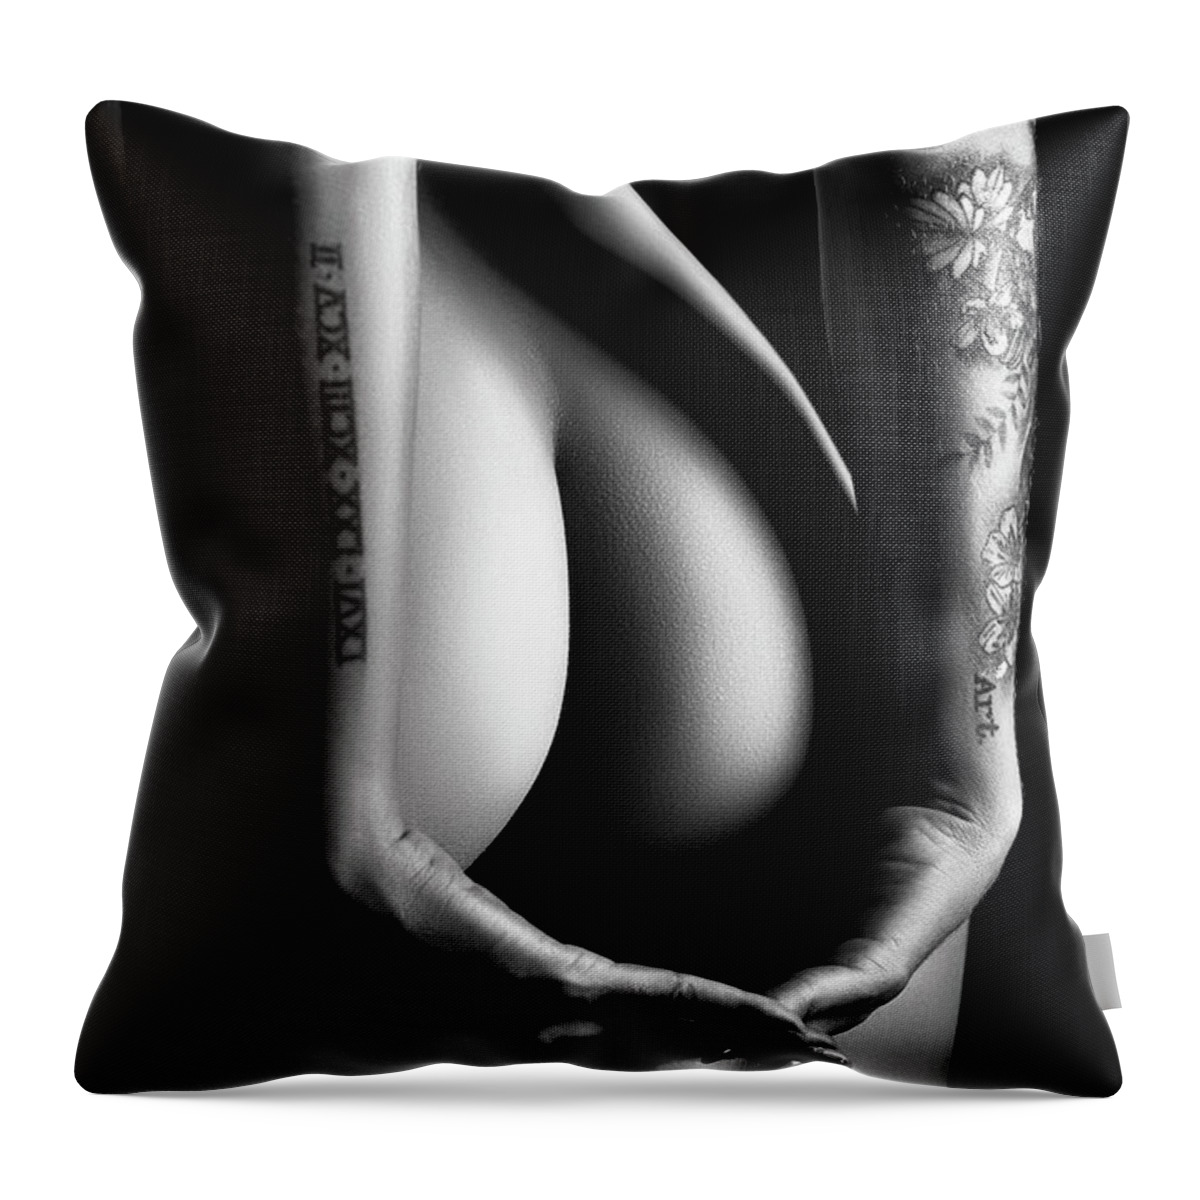 Woman Throw Pillow featuring the photograph Sensual Nude Woman 4 by Johan Swanepoel